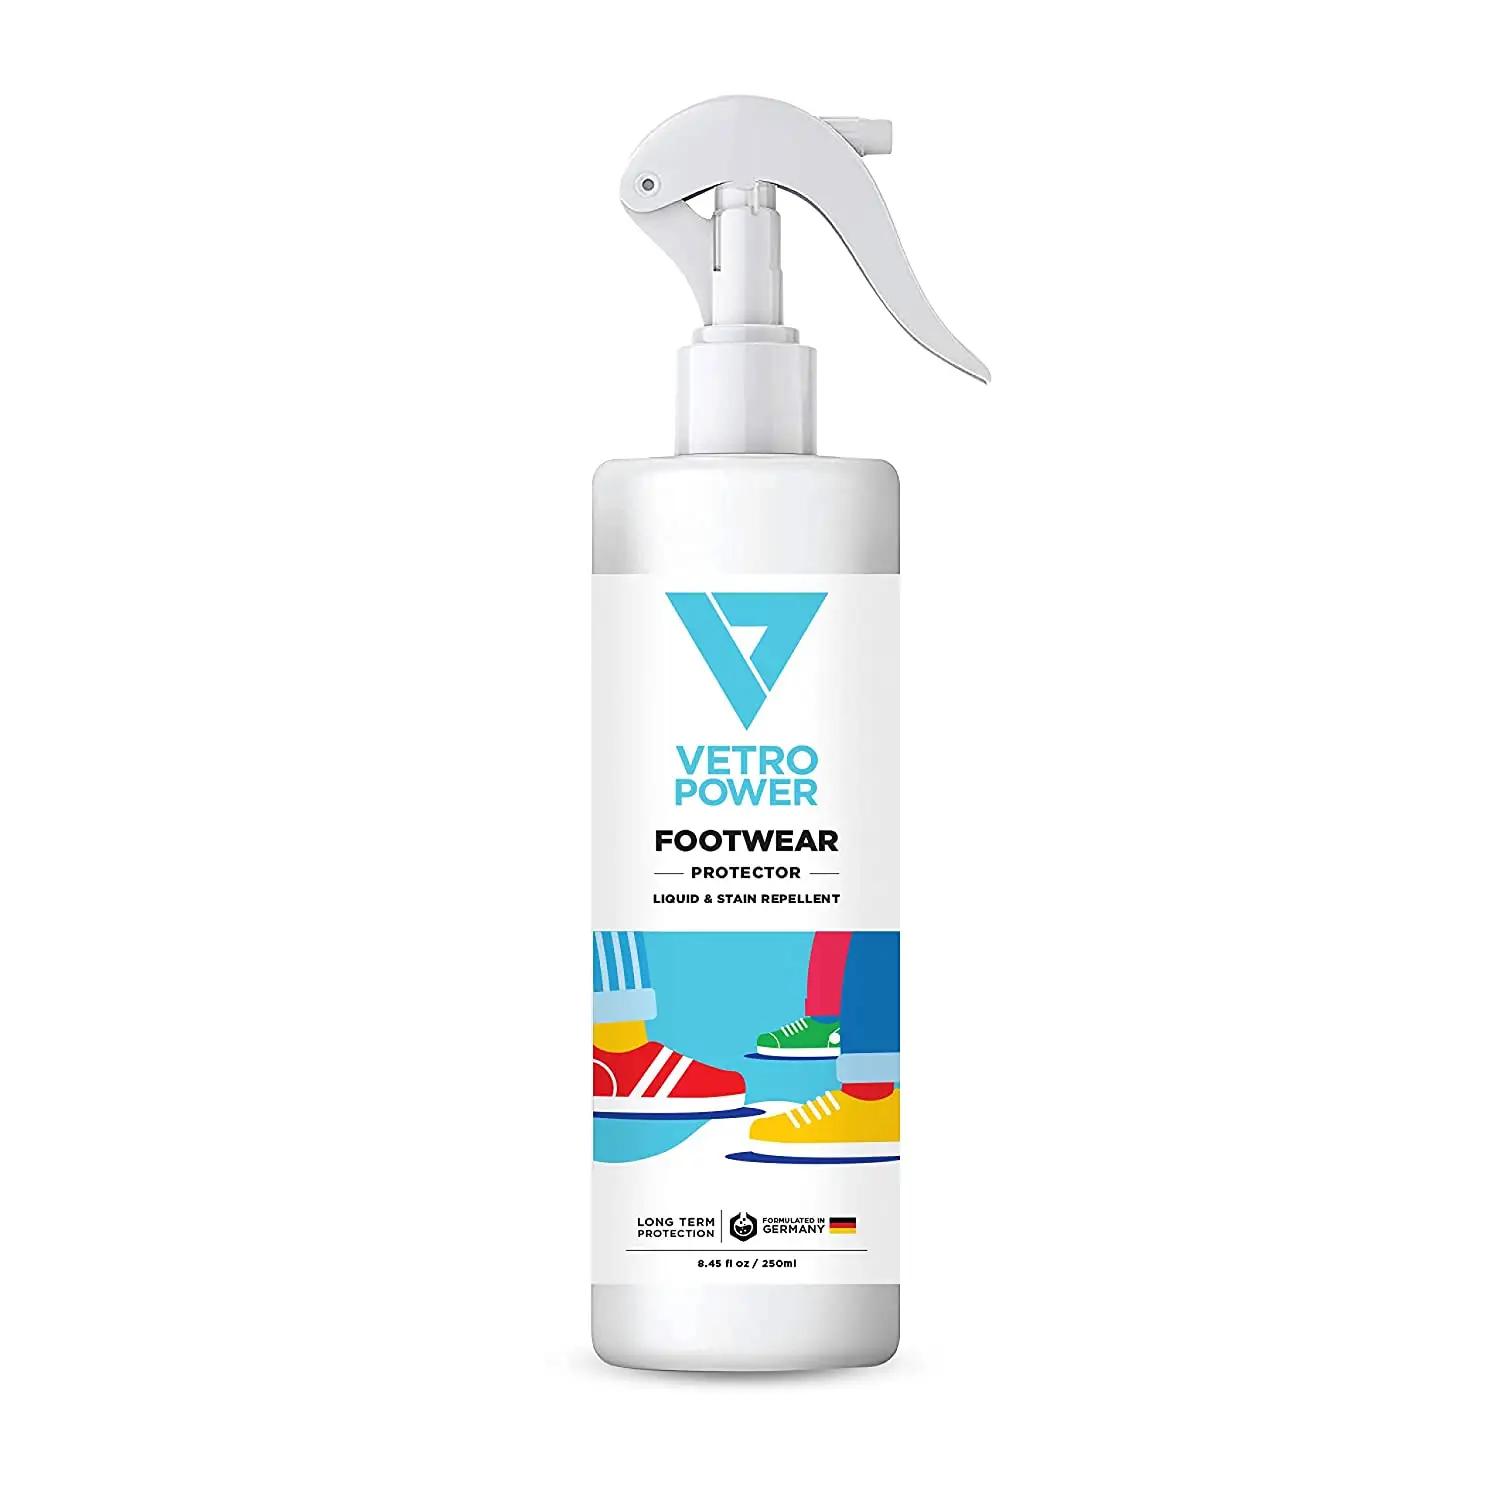 Vetro Power Footwear Protector Spray Invisible Water and Stain Repellent Protects Suede, Nubuck, Leather,, Fabric Shoes (250ml)